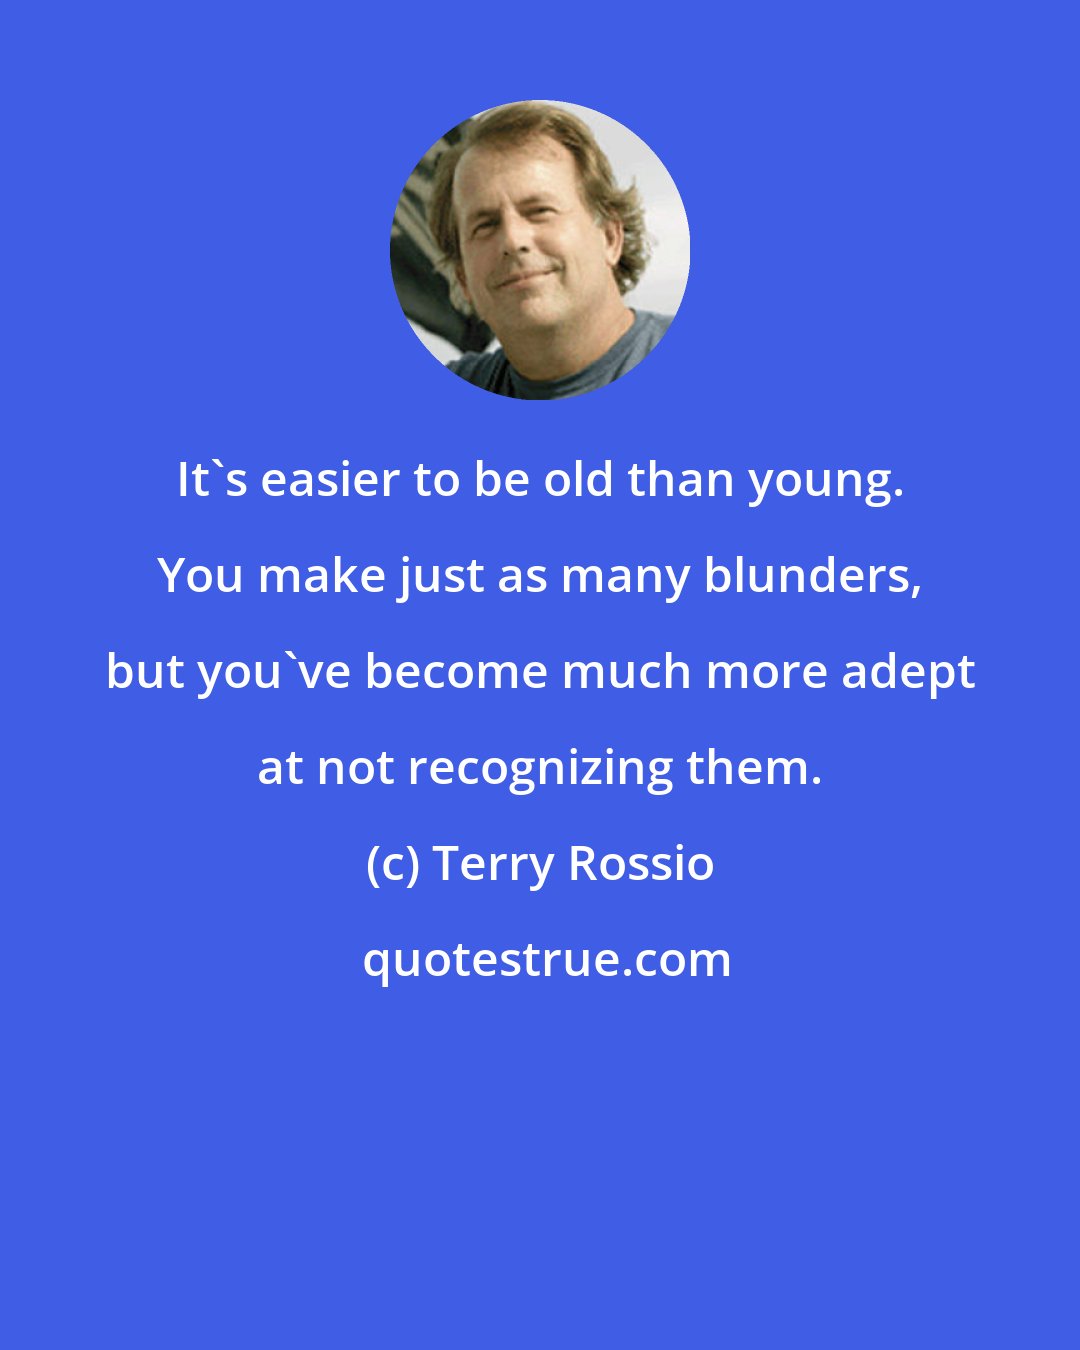 Terry Rossio: It's easier to be old than young. You make just as many blunders, but you've become much more adept at not recognizing them.